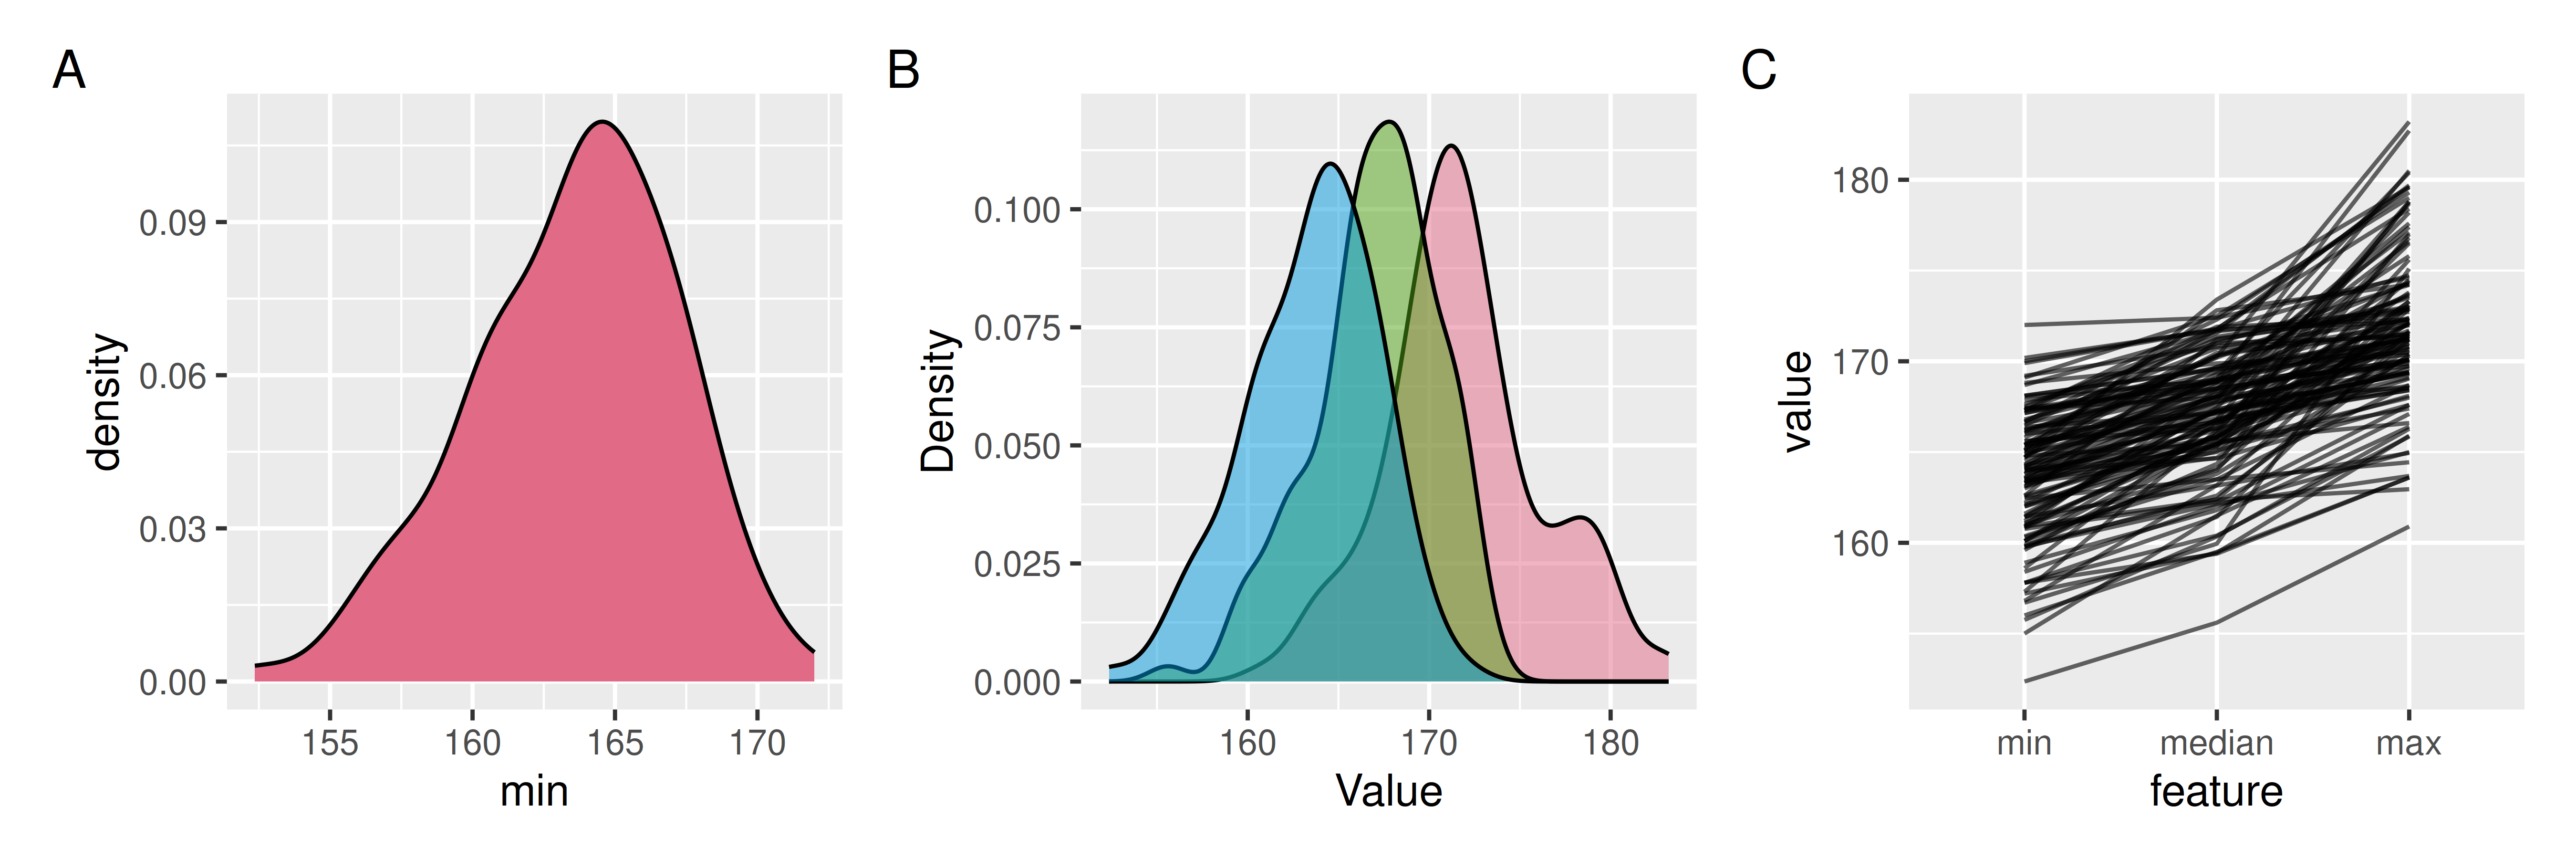 Three plots showing the distribution of minimum, median, and maximum values of height in centimeters. Part A shows just the distribution of minimum, part B shows the distribution of minimum, median, and maximum, and part C shows these three values plotted together as a line graph. We see that there is overlap amongst all three statistics. That is, some countries minimum heights are taller than some countries maximum heights.